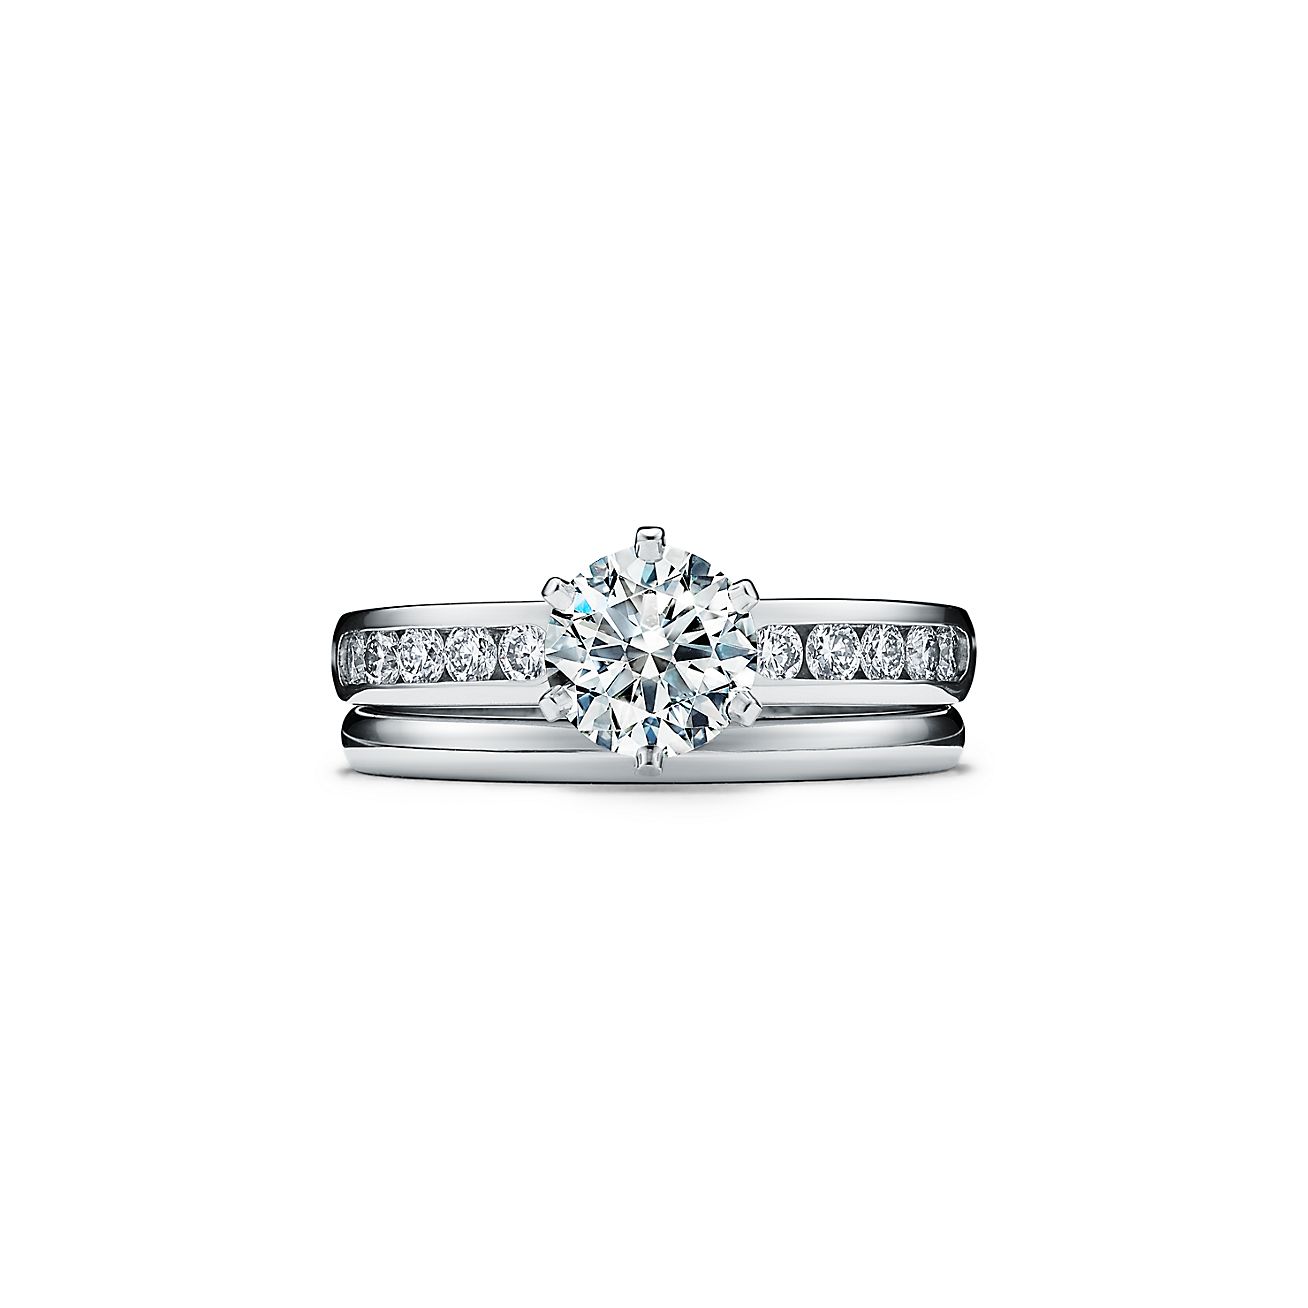 Channel Set Hidden Halo Engagement Ring with Round Cut Diamond in 14KT  White Gold | With Clarity